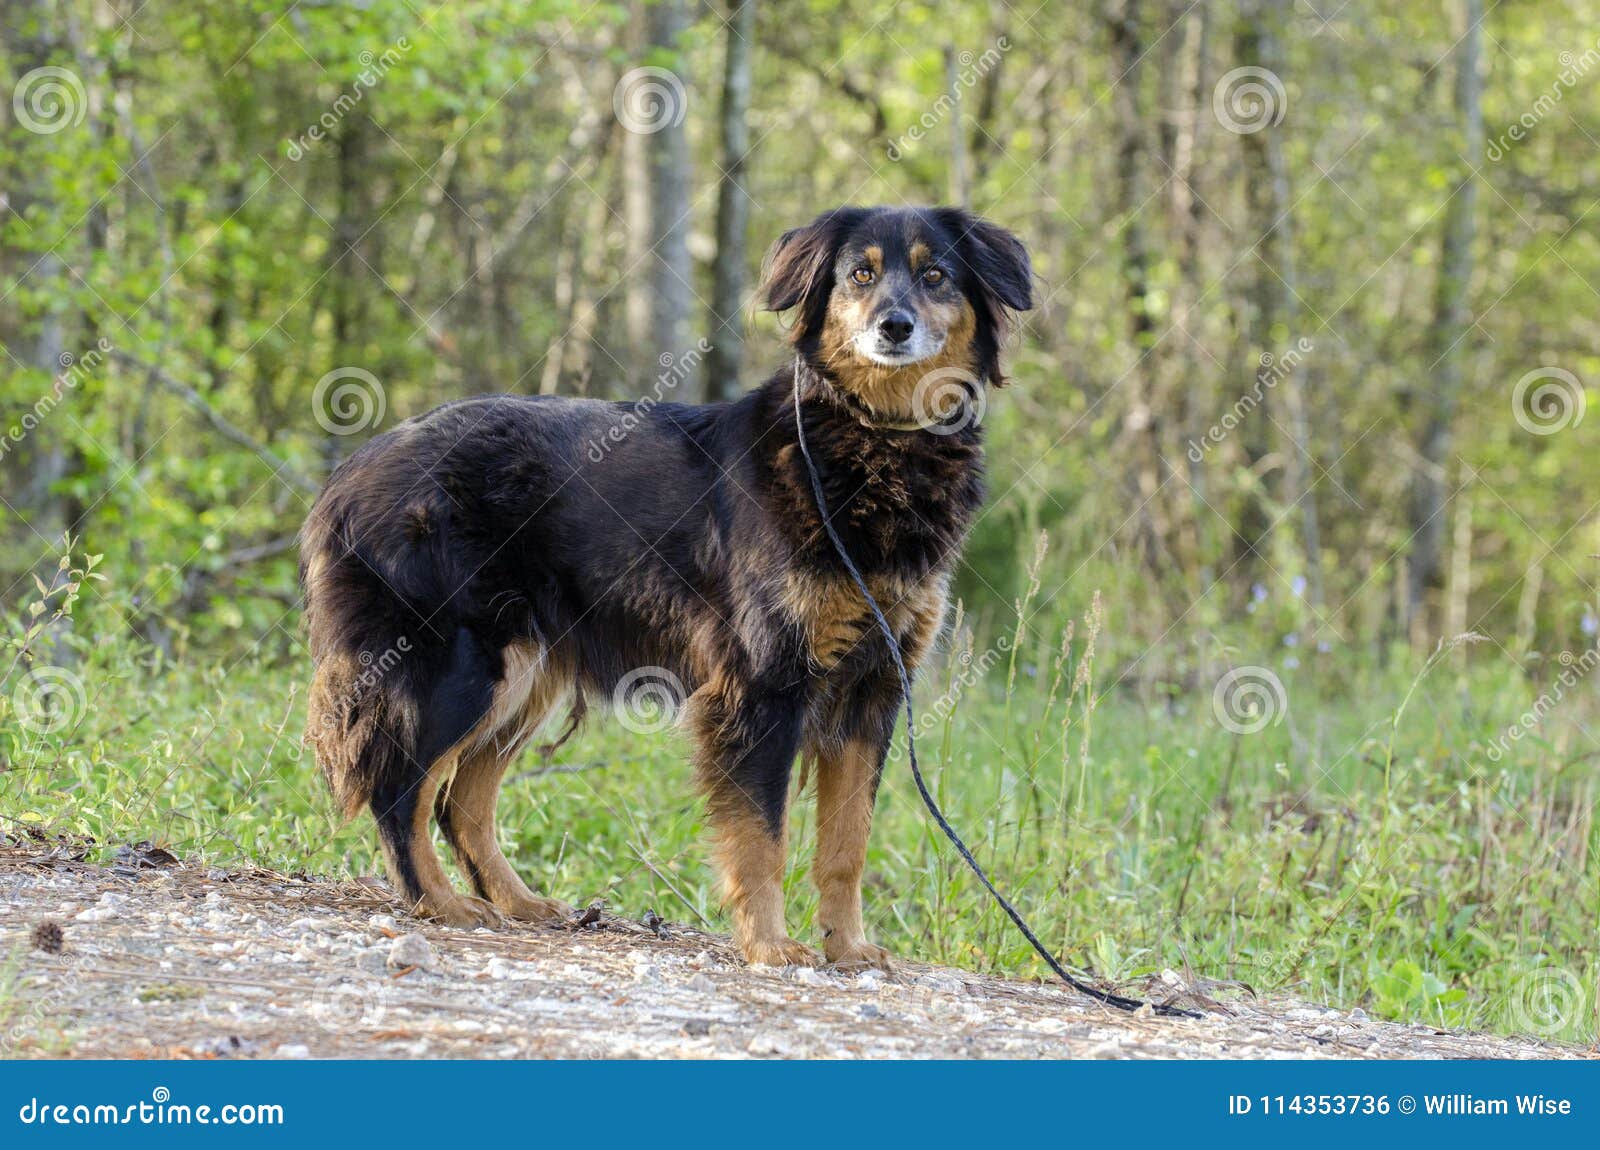 Aussie Setter Mix Dog Pet Rescue Adoption Photography Stock Photo Image Of Puppy Mixed 114353736